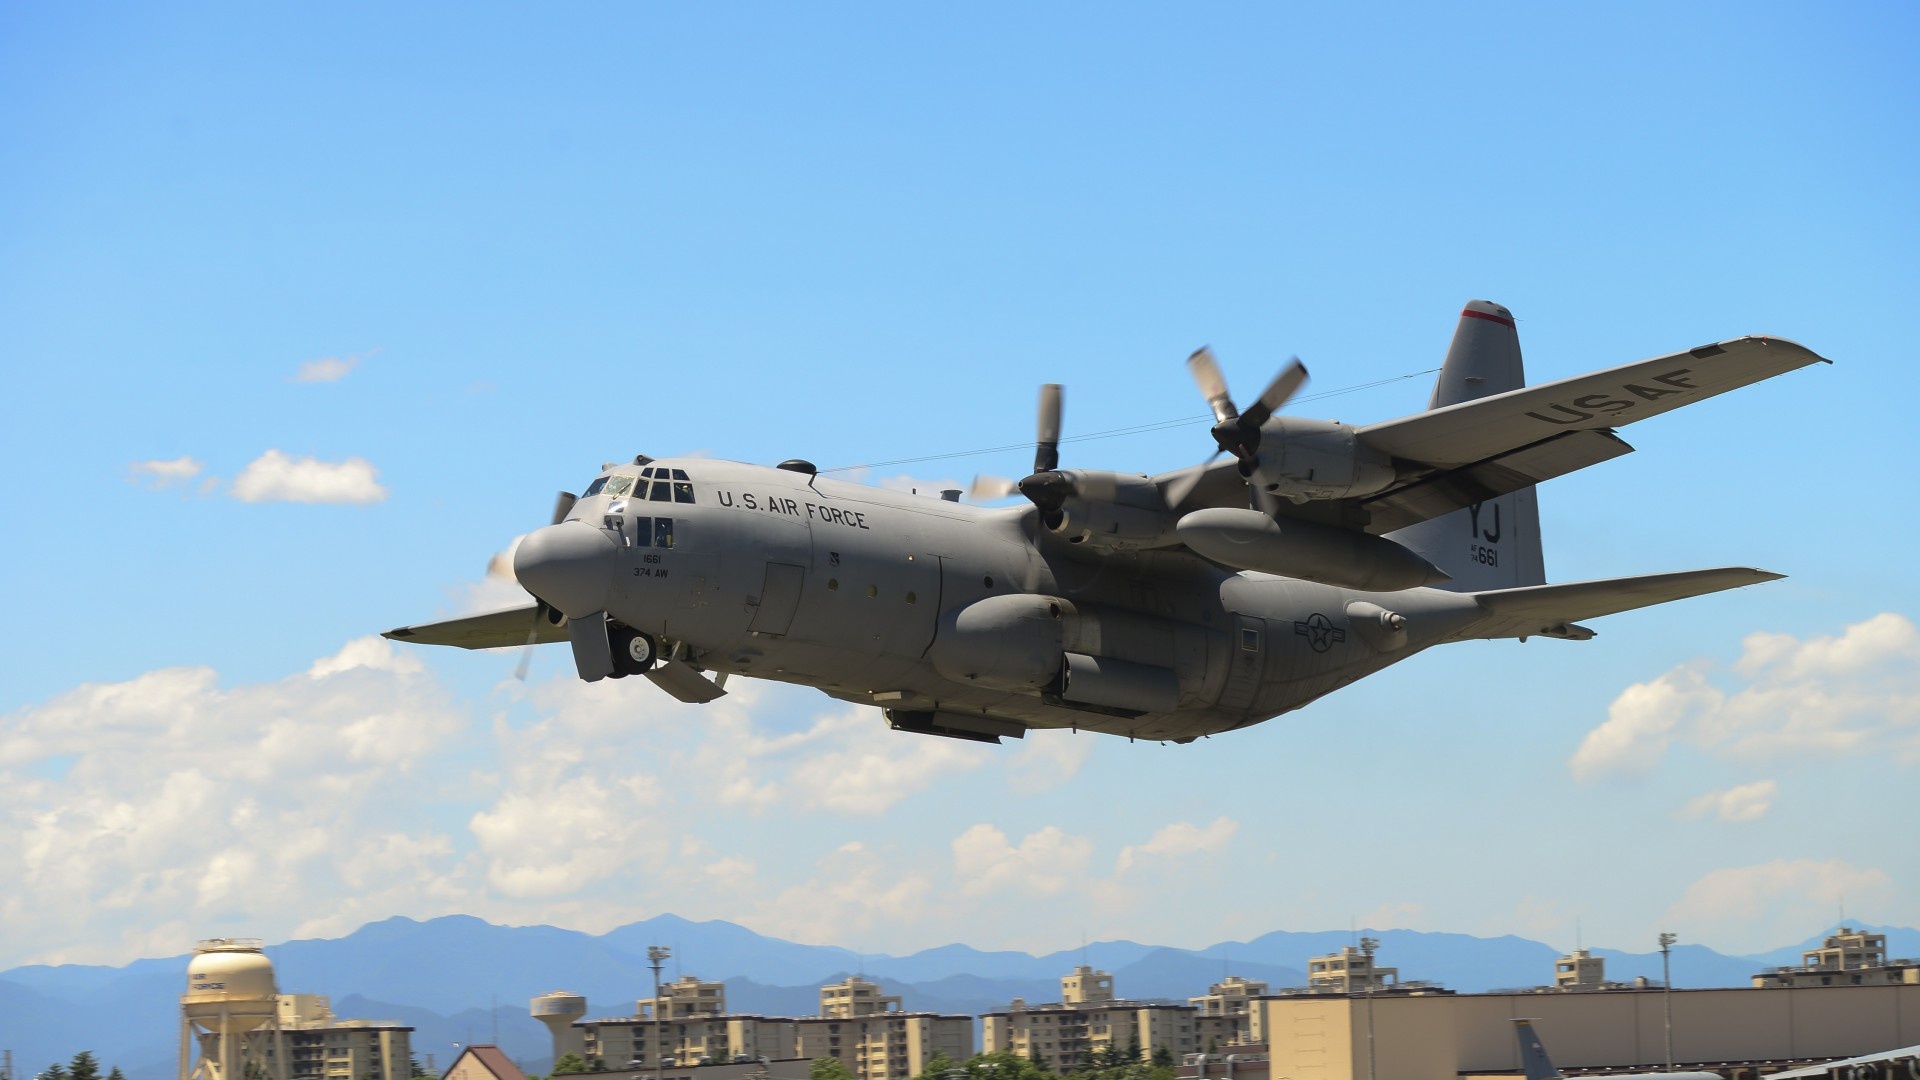 Lockheed C-130 Hercules, Mighty military aircraft, Sky-high strength, Unstoppable force, 1920x1080 Full HD Desktop